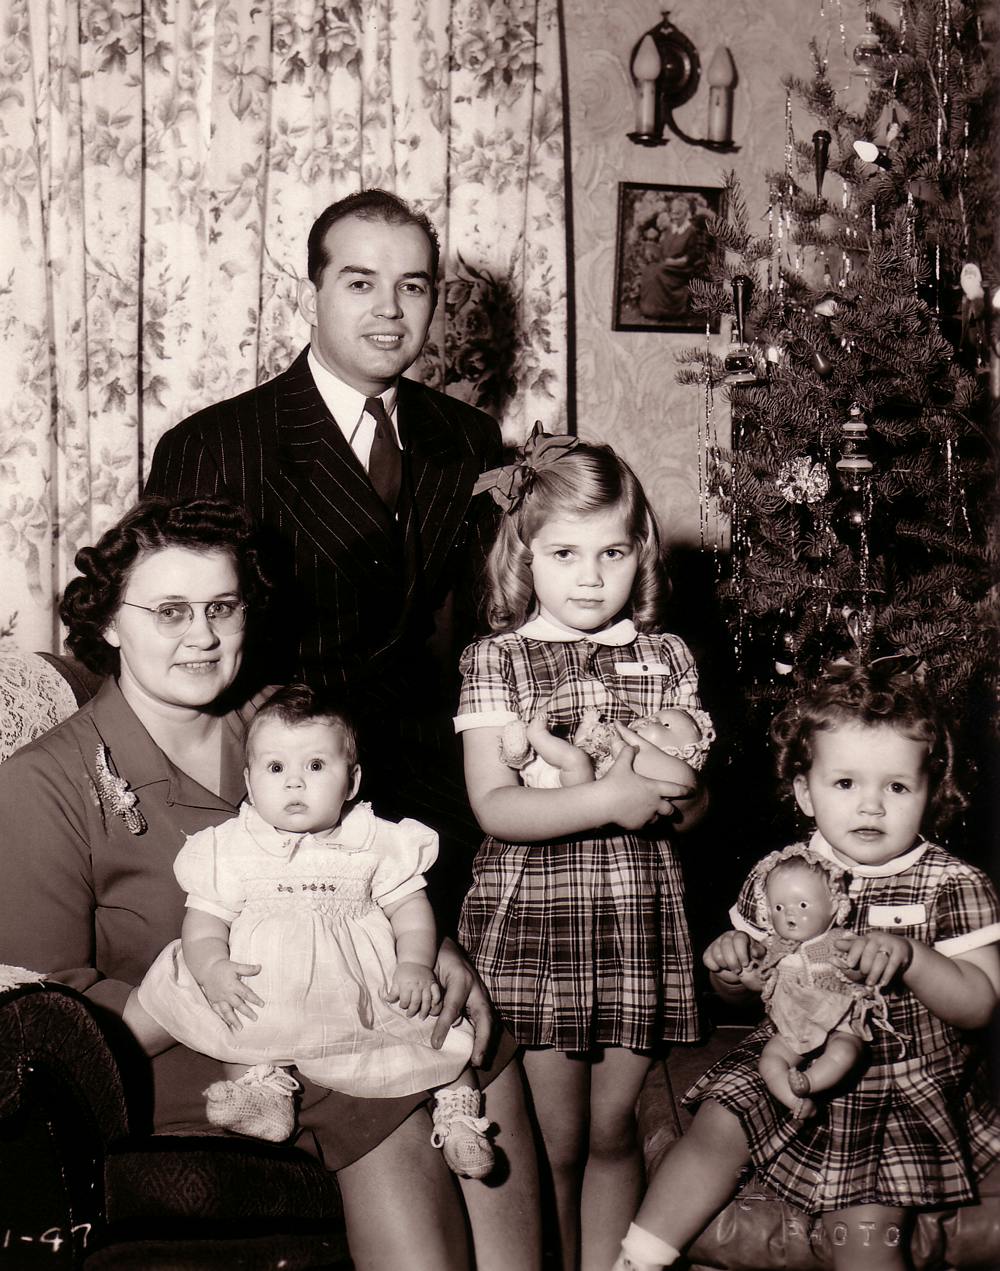 Stanley with his wife and three children next to a Christmas tree